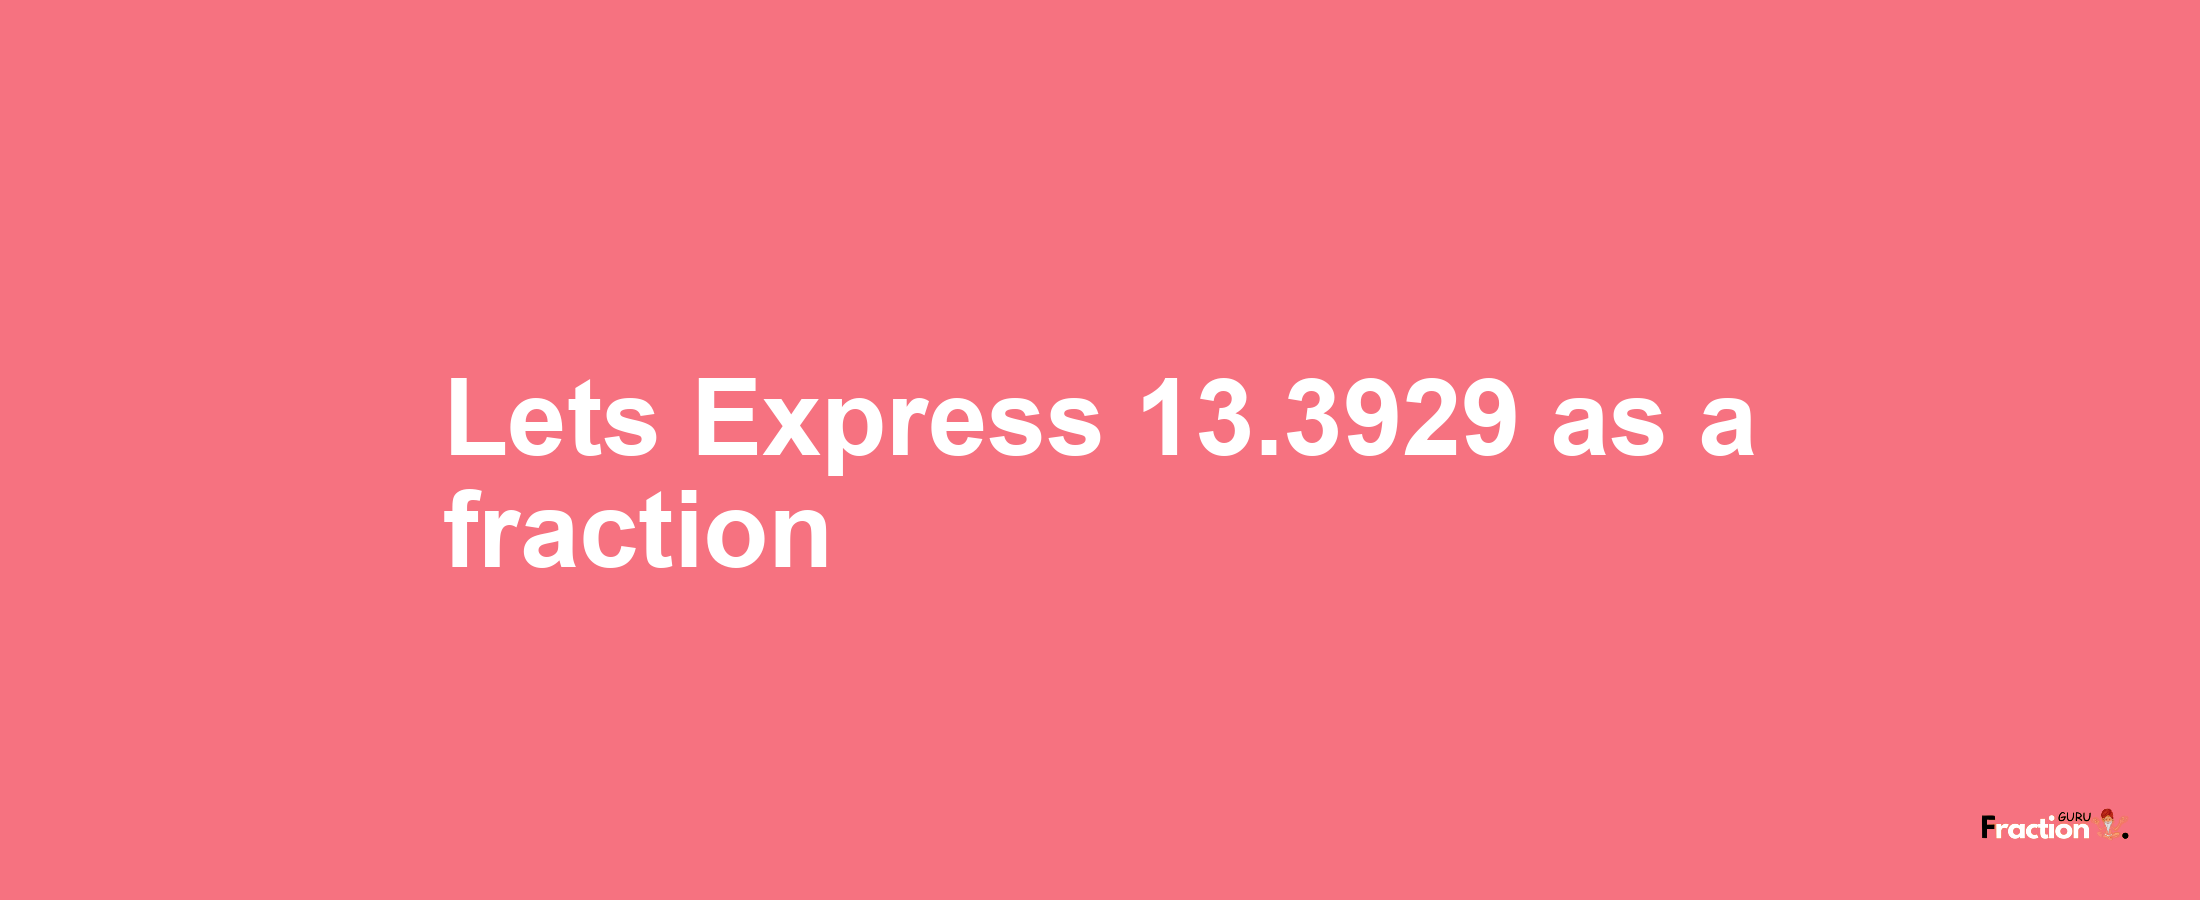 Lets Express 13.3929 as afraction